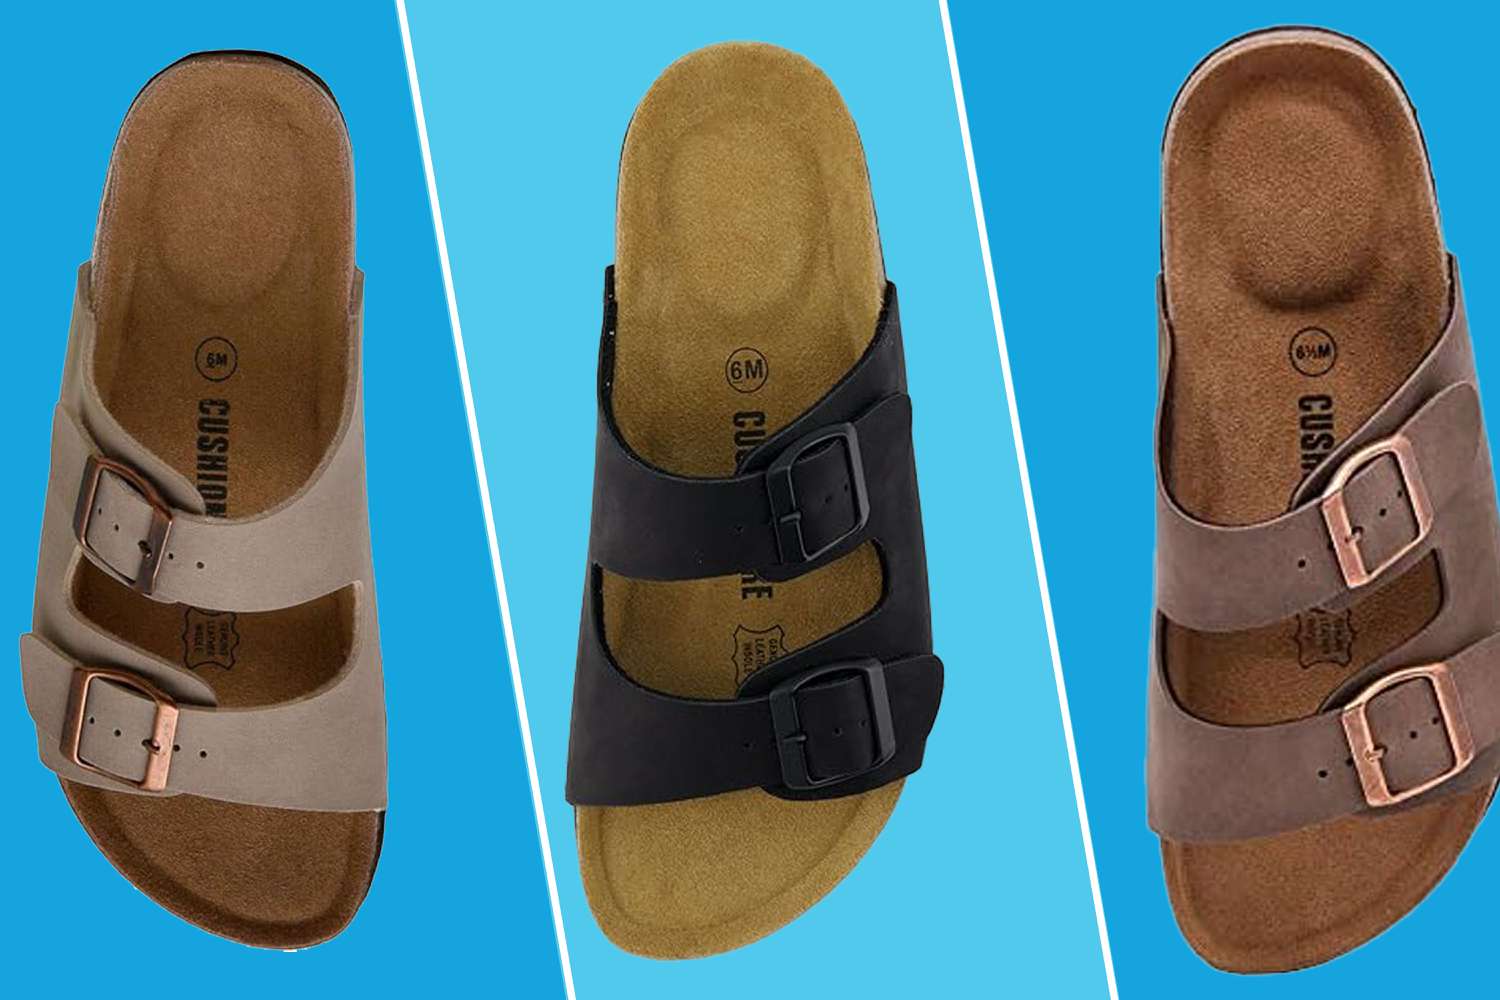 These Double-Buckle Slides Look Just Like a Popular Celeb-Worn Sandal, and They’re Just $30 Right Now